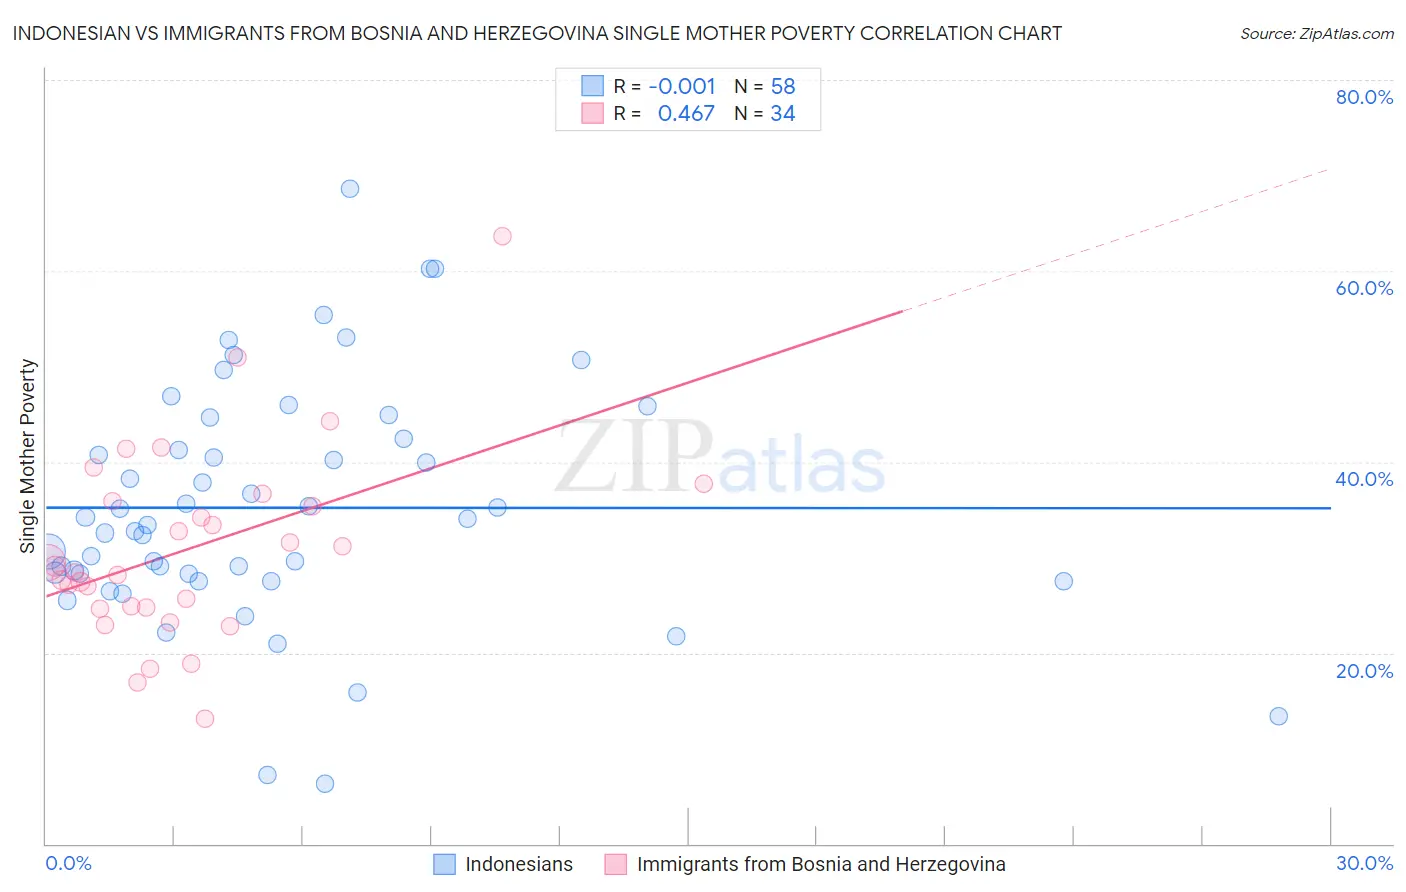 Indonesian vs Immigrants from Bosnia and Herzegovina Single Mother Poverty